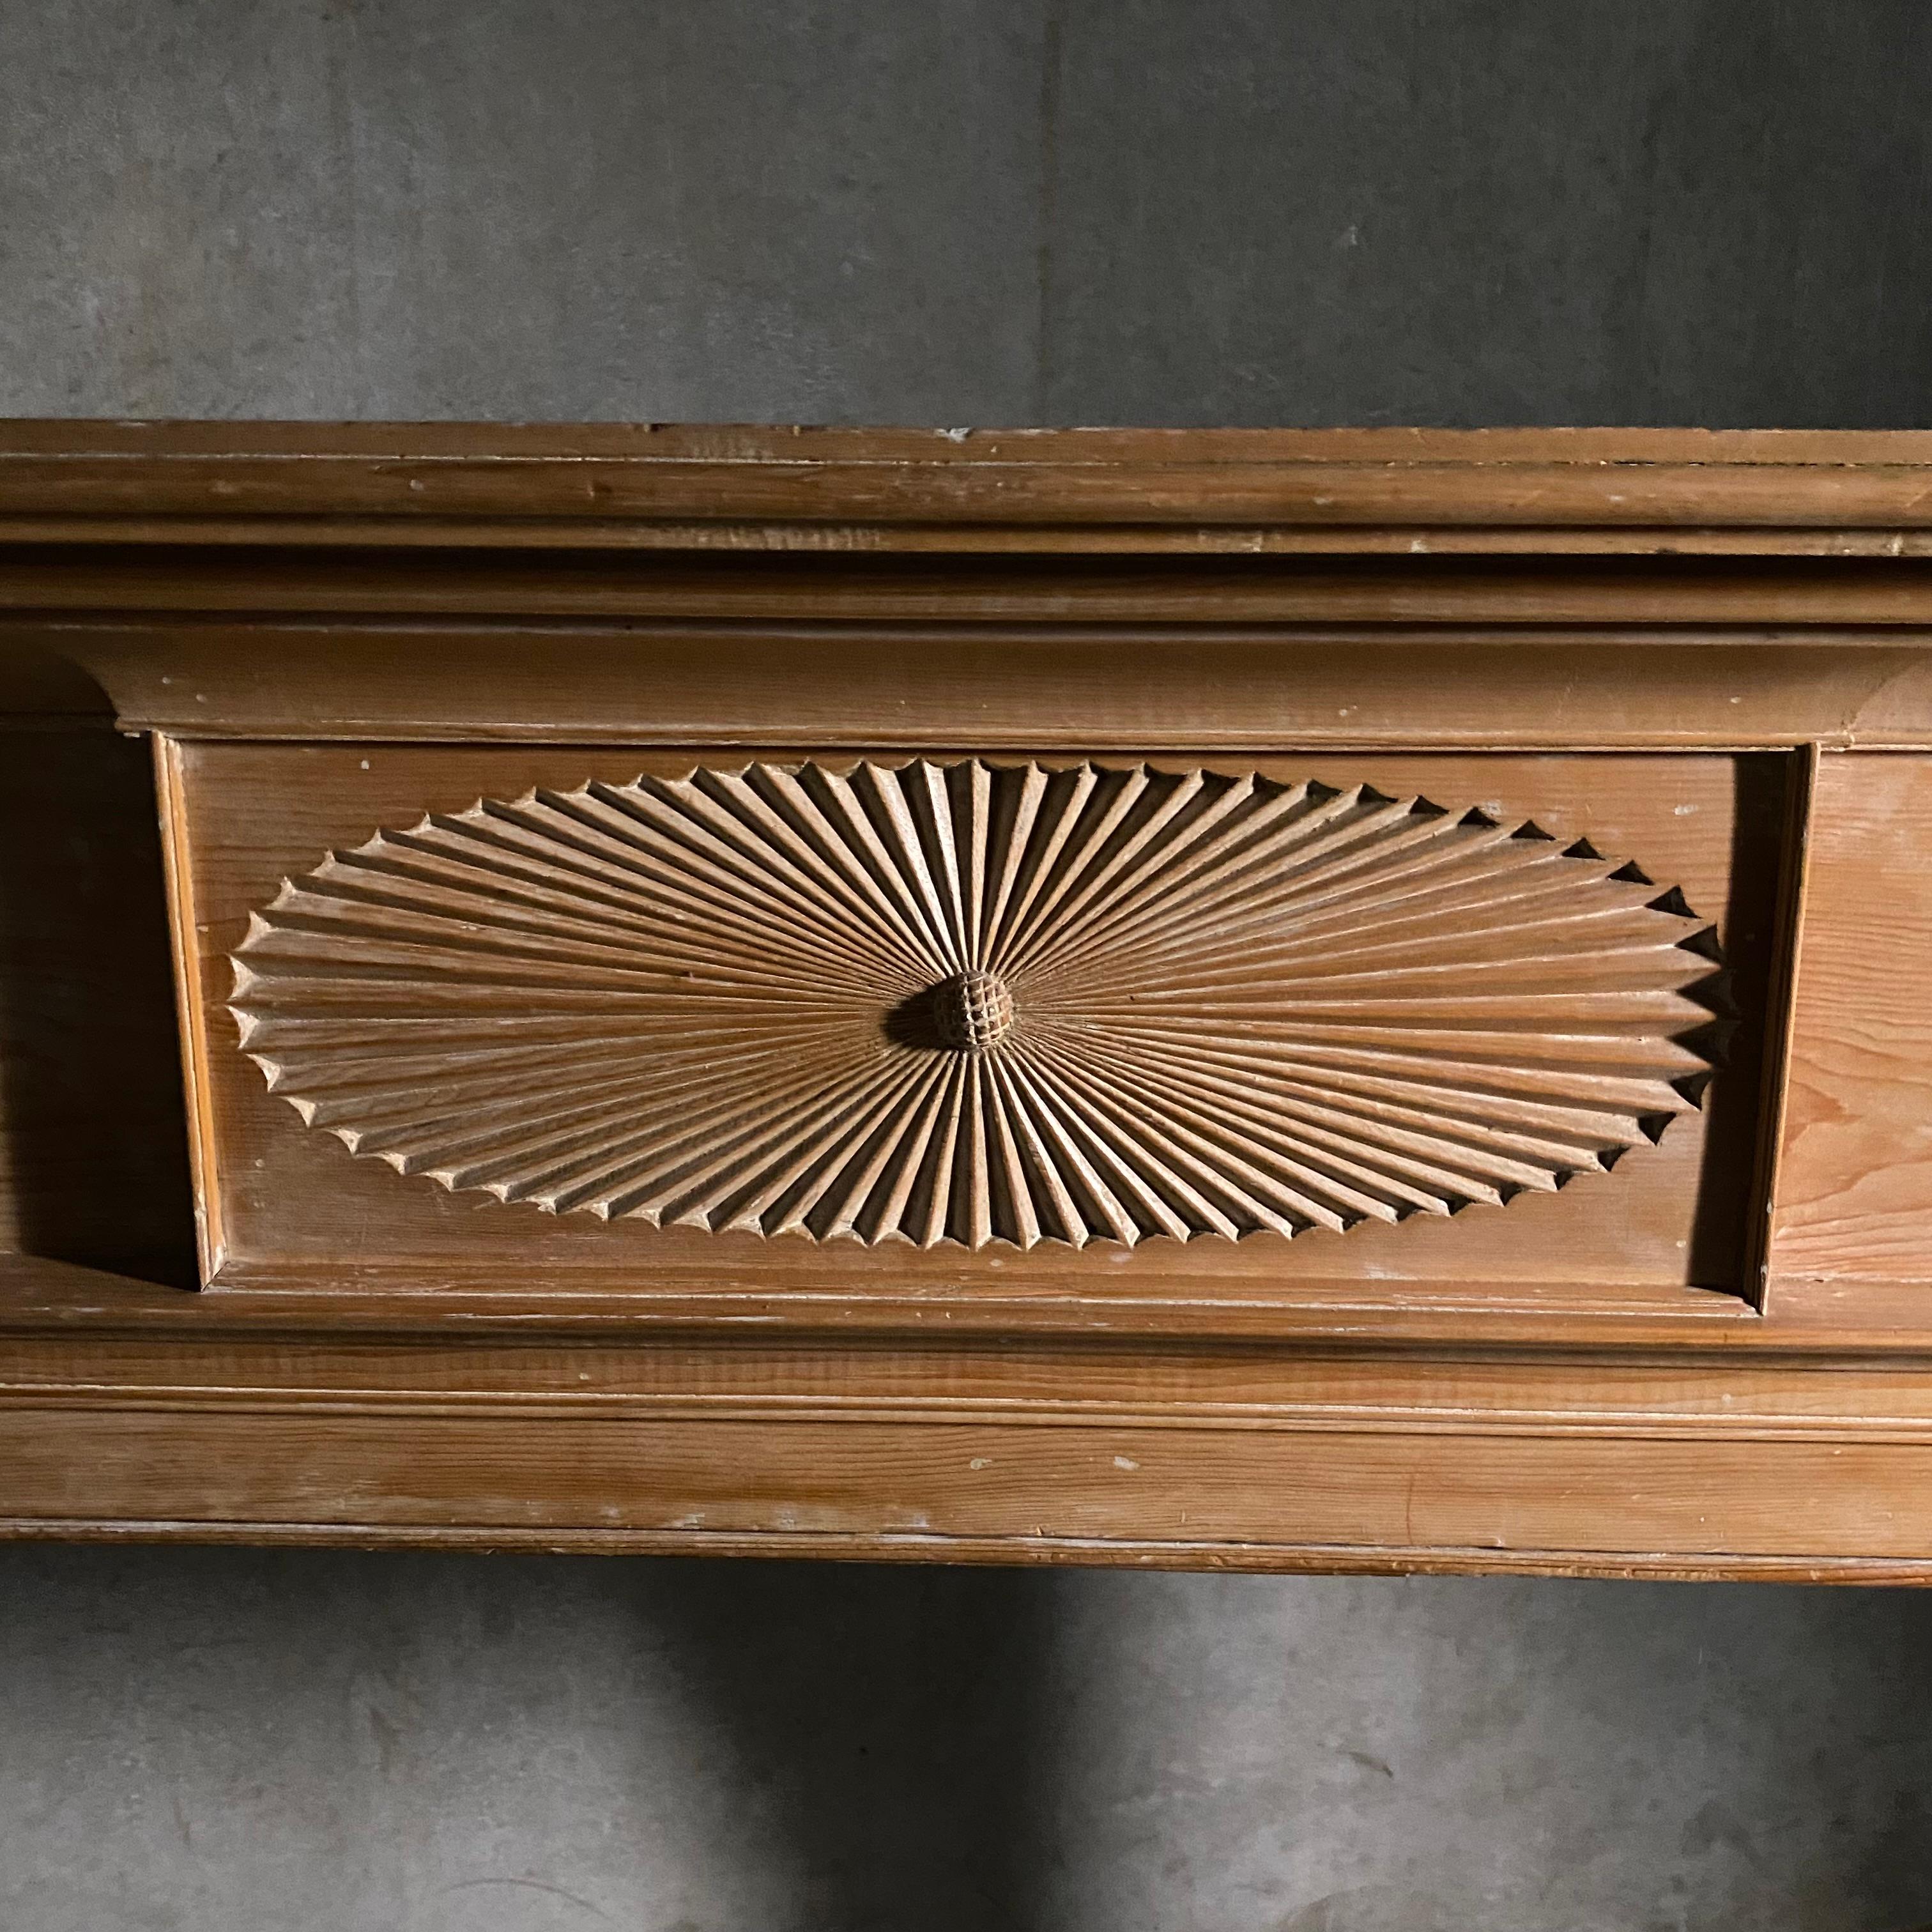 This 19th century mantel was found in Connecticut River Valley in the 1960's, New Hampshire. It features a rustic yet sophisticated formal presentation. The mantel details include channeling on the legs with a hand carved centre fan and acorn